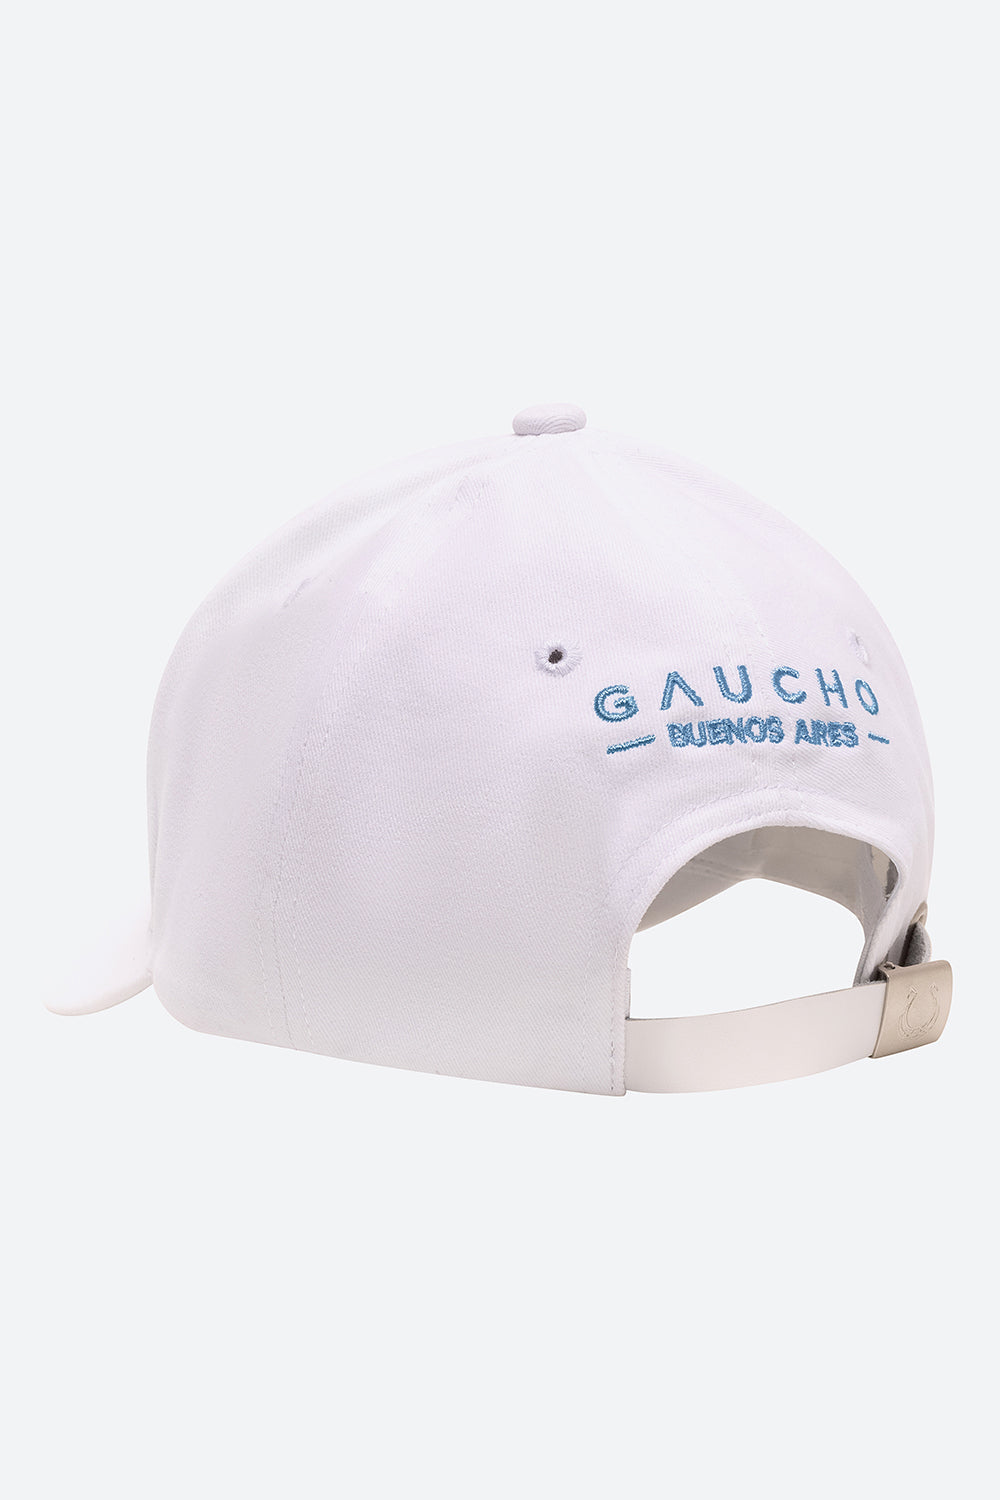 Iconic Gaucho Cap in White with Light Blue Embroidery